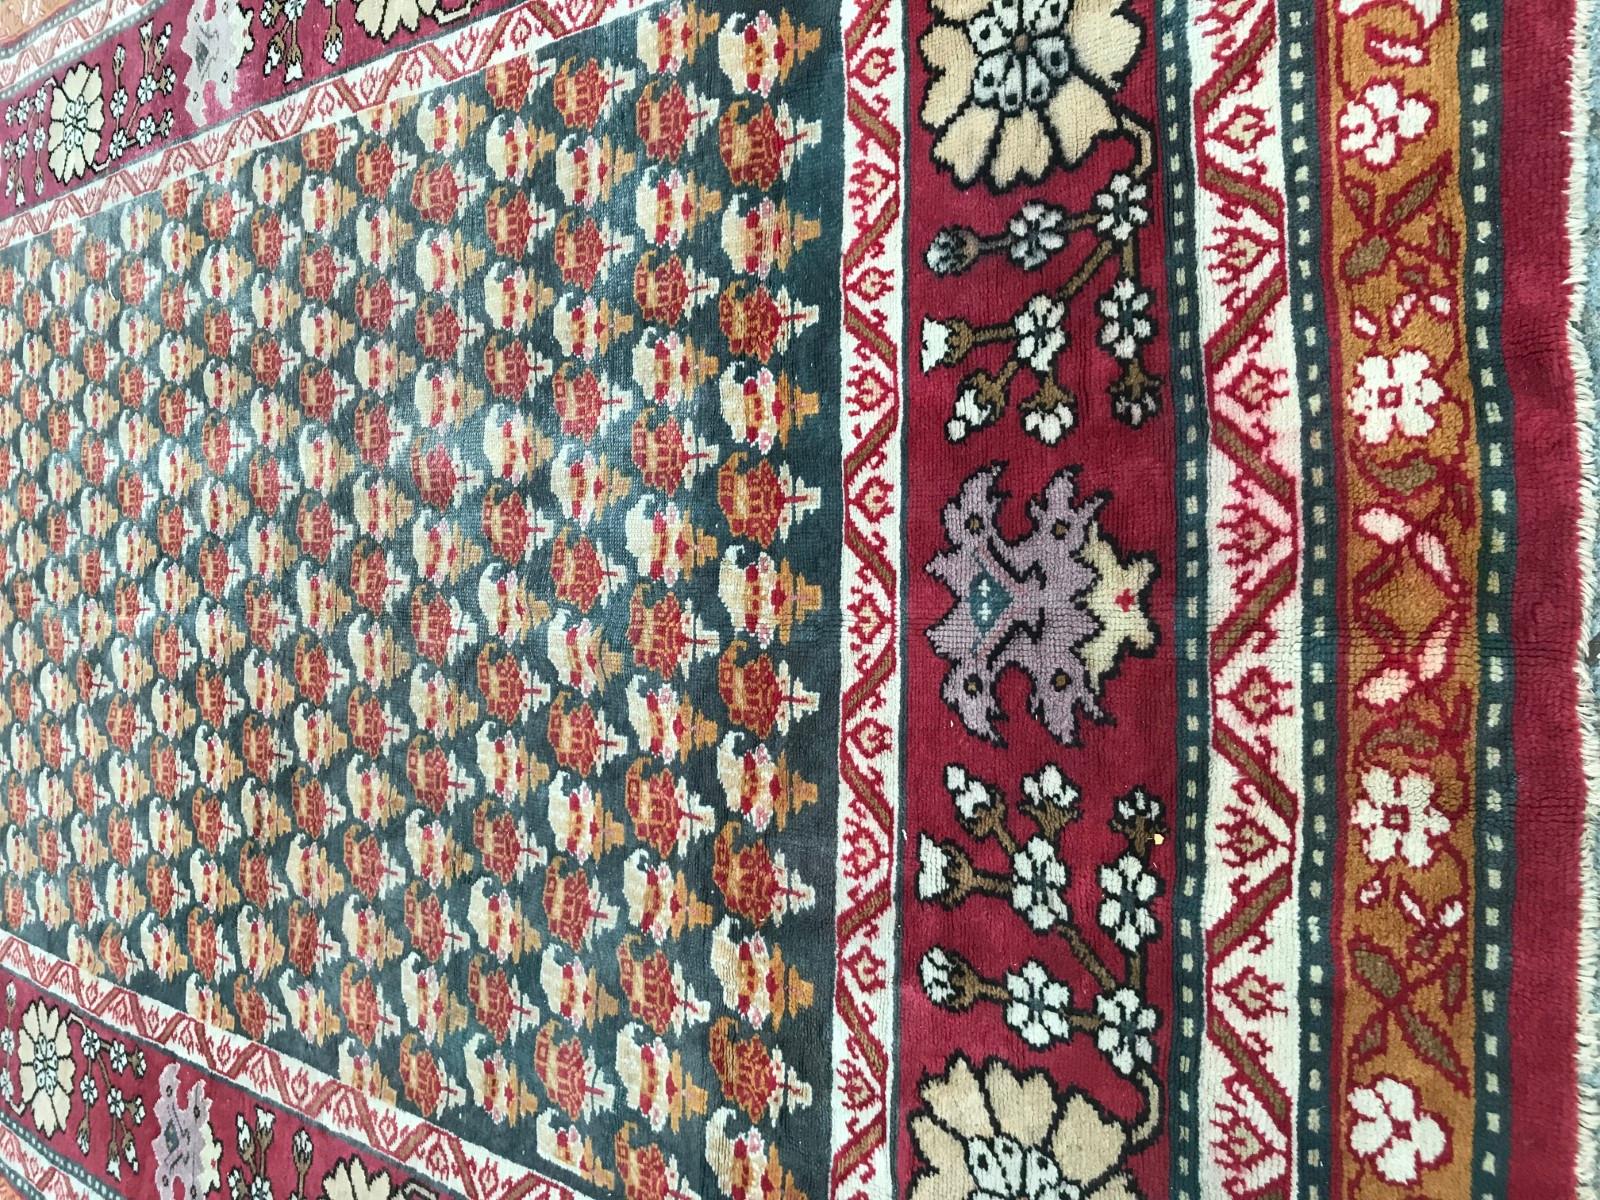 Beautiful long European style Algerian rug with nice colors and patterns very decorative with a curious design showing Santa Claus on each detail design, and beautiful colors with purple, pink, yellow and green, entirely hand knotted, wool velvet on